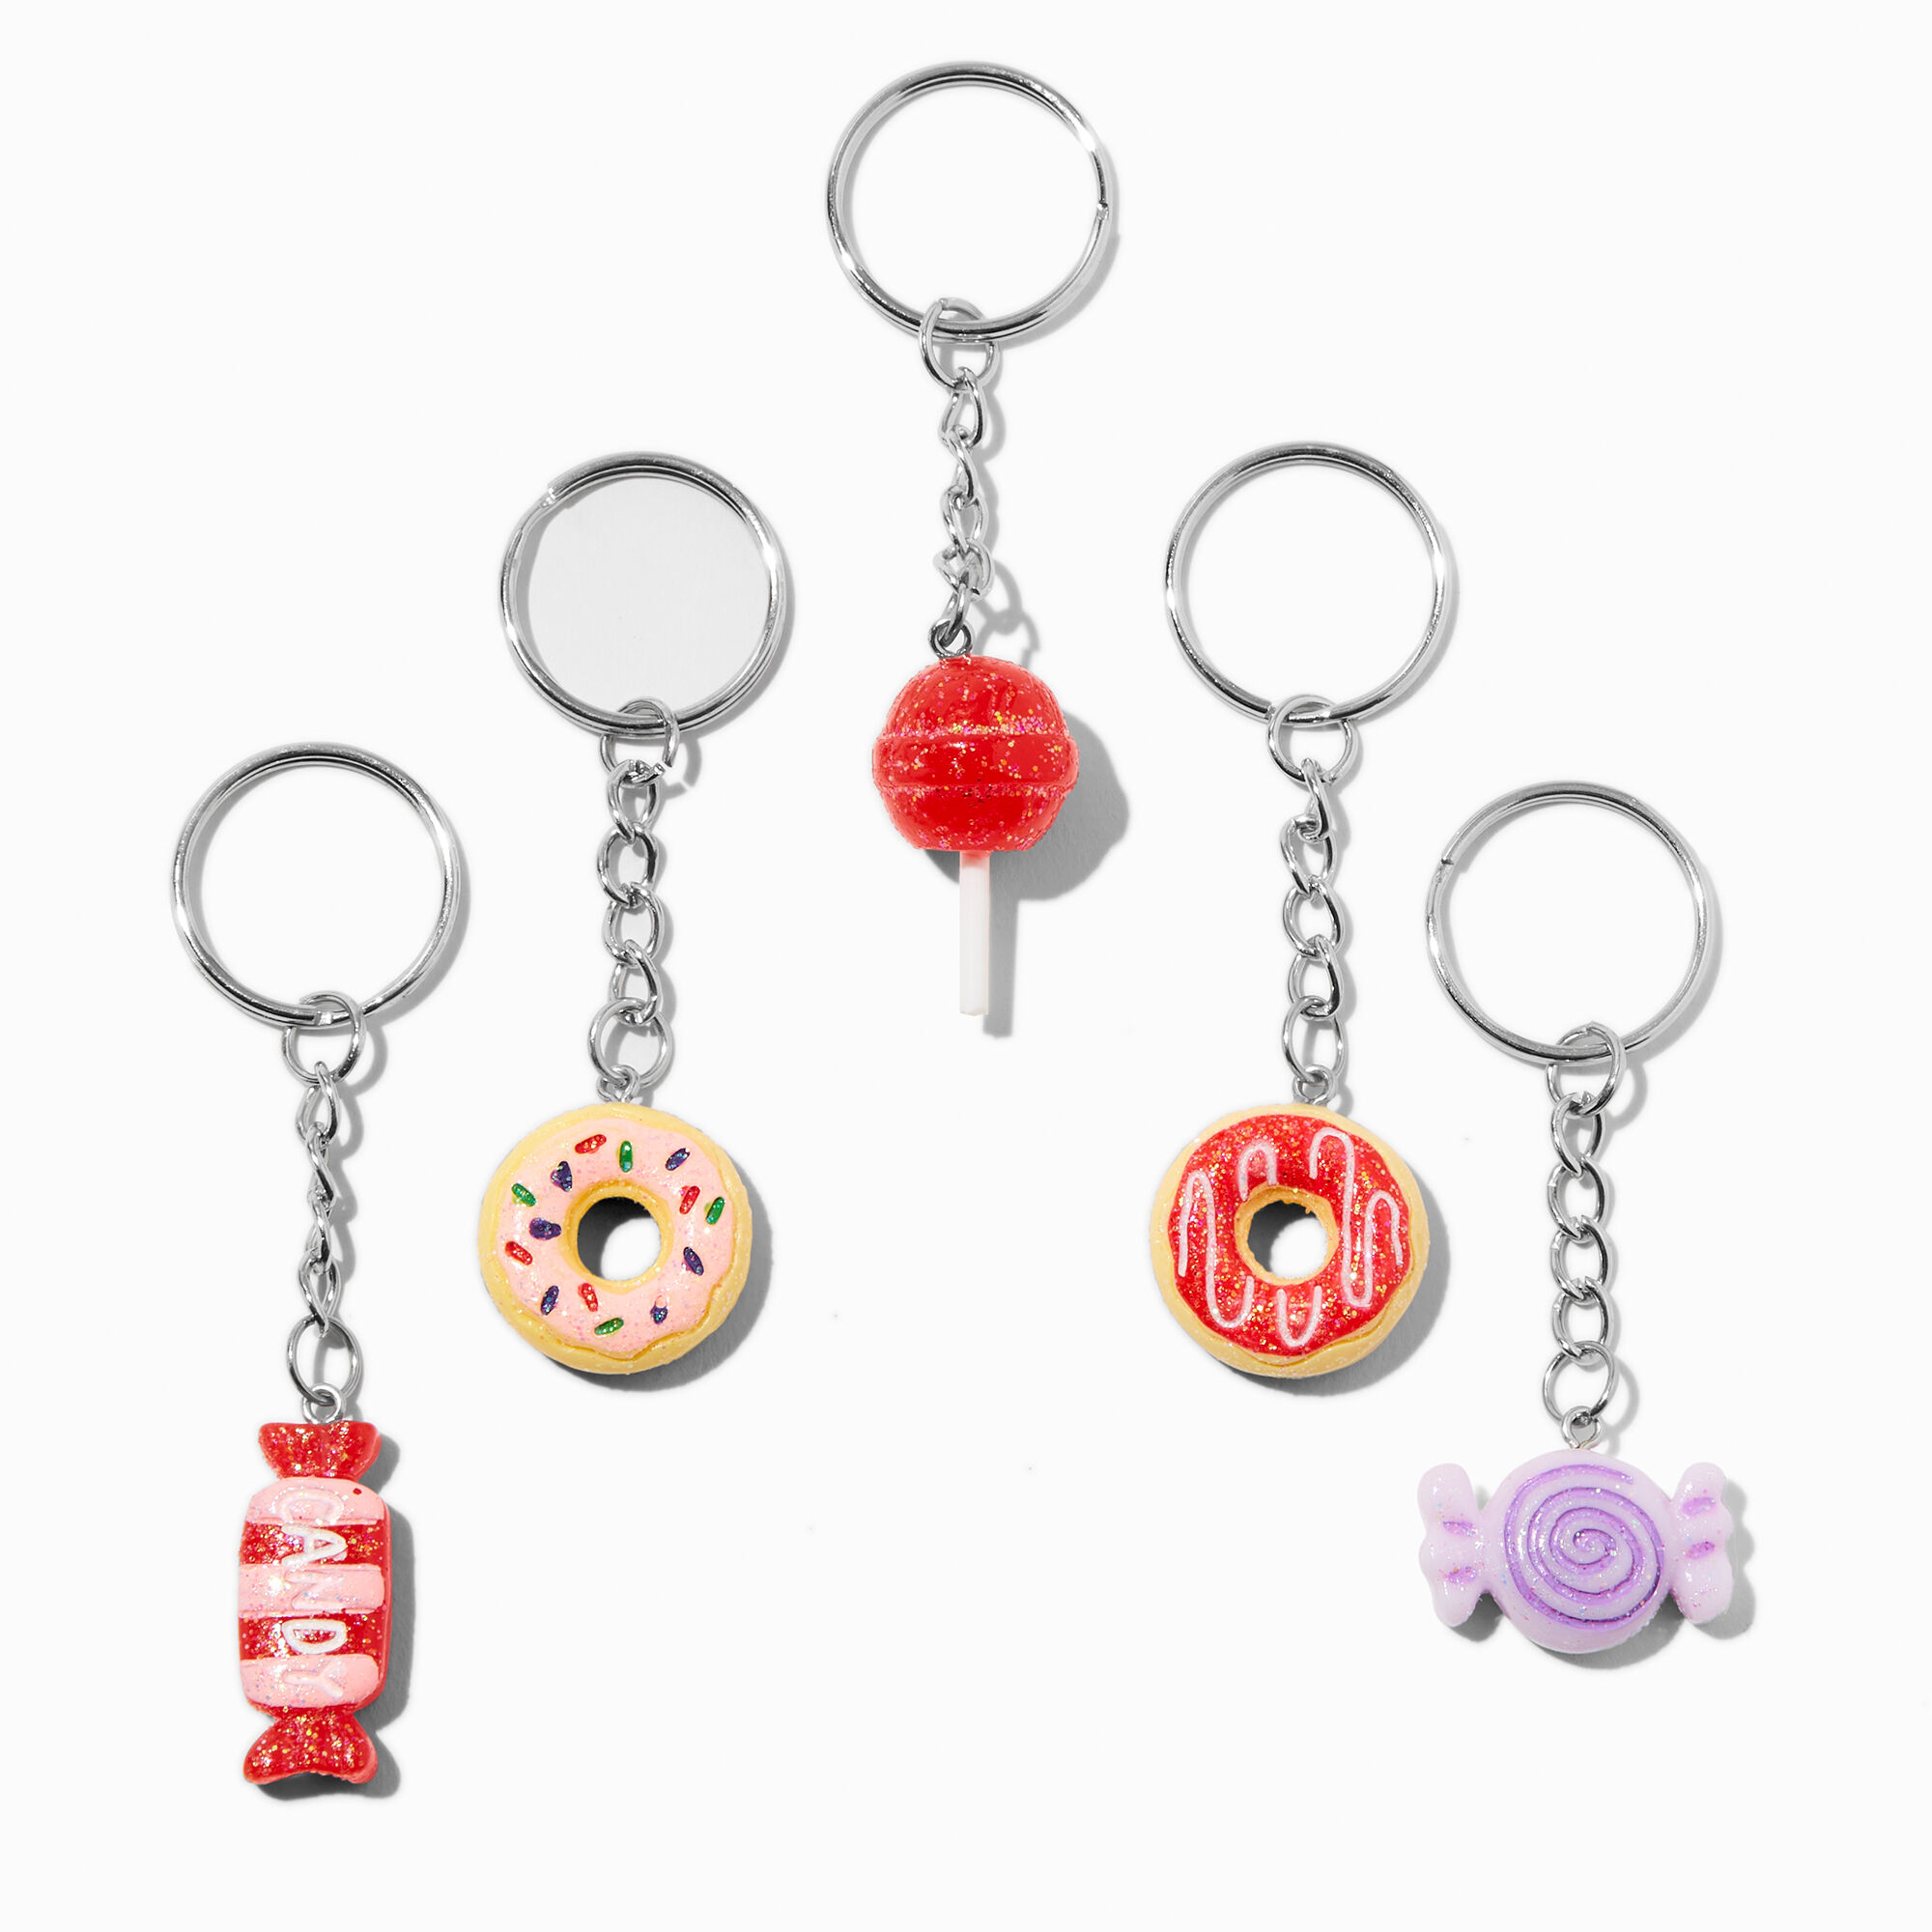 View Claires Best Friends Glitter Candy Keychains 5 Pack information